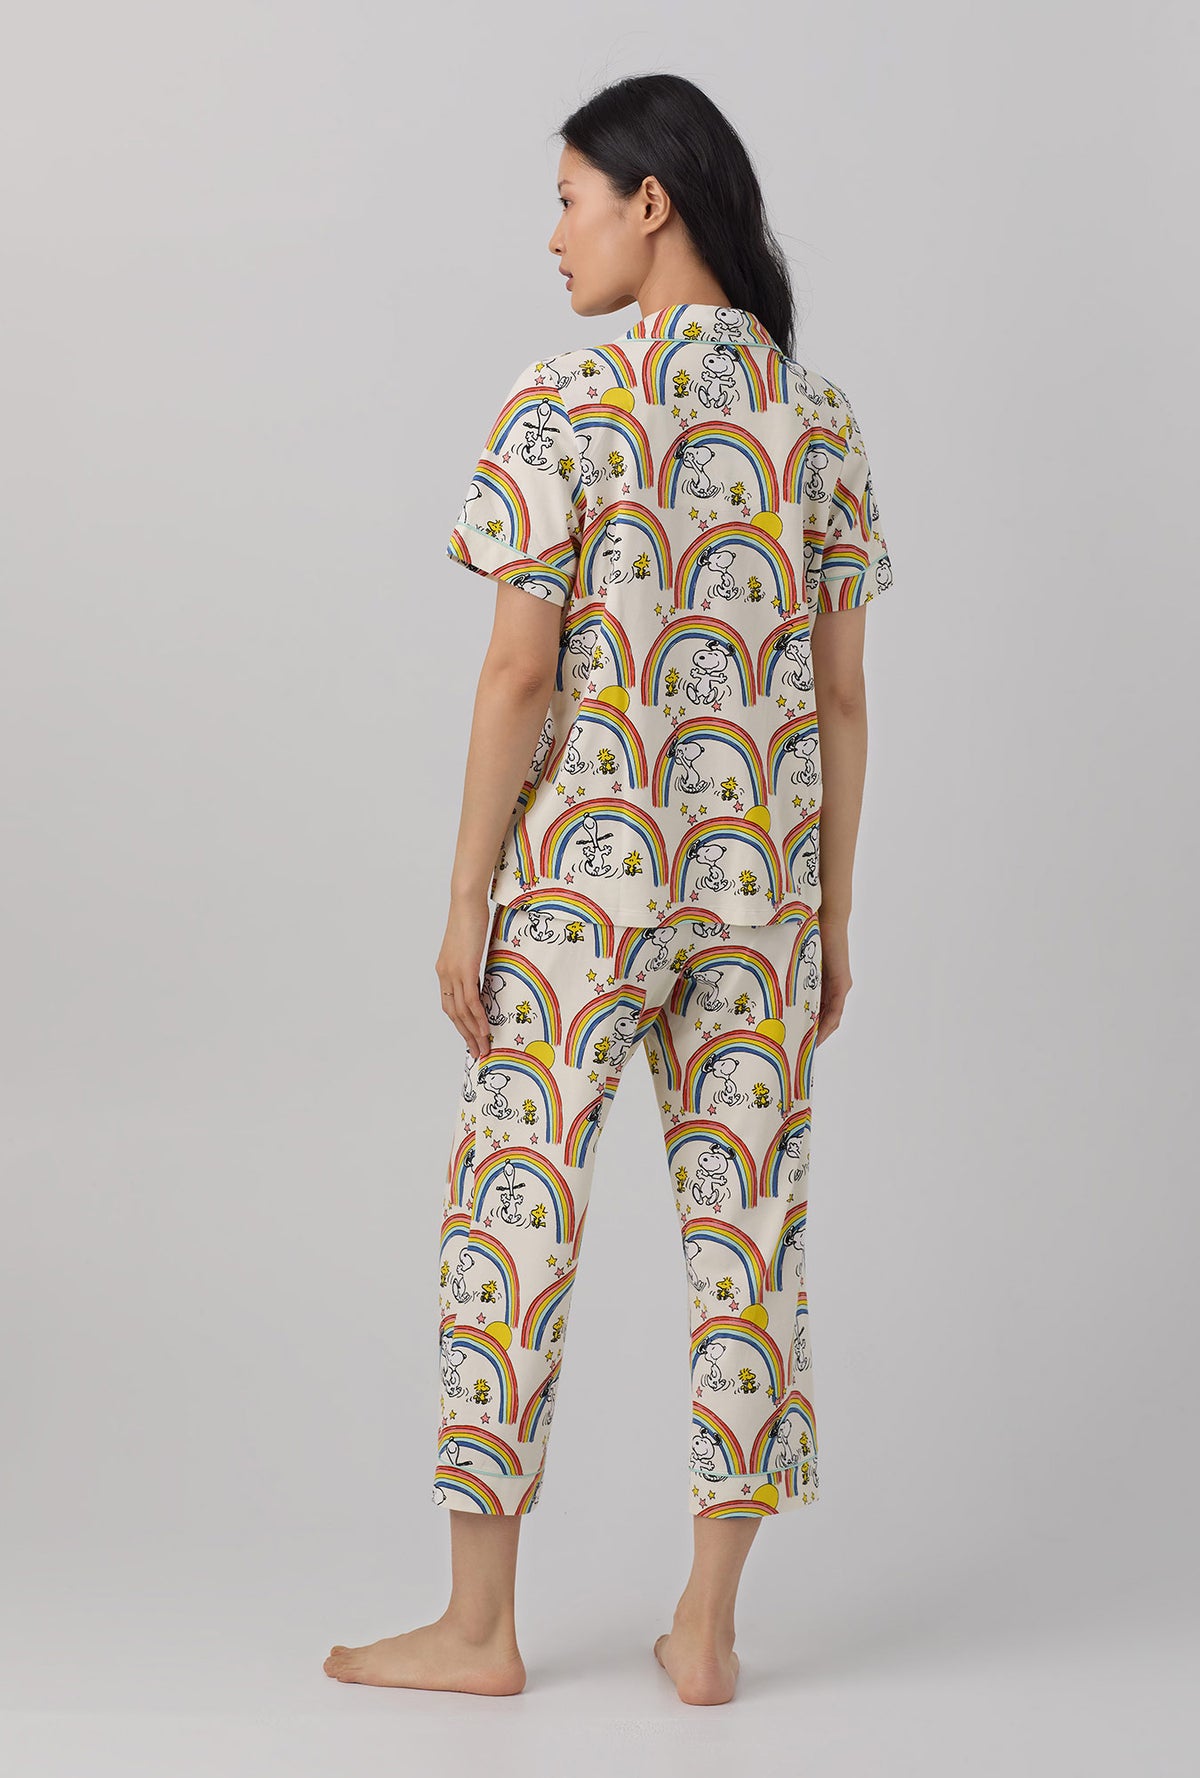 A lady wearing white Short Sleeve Classic Stretch Jersey Cropped PJ Set  with Sunshine Snoopy print.